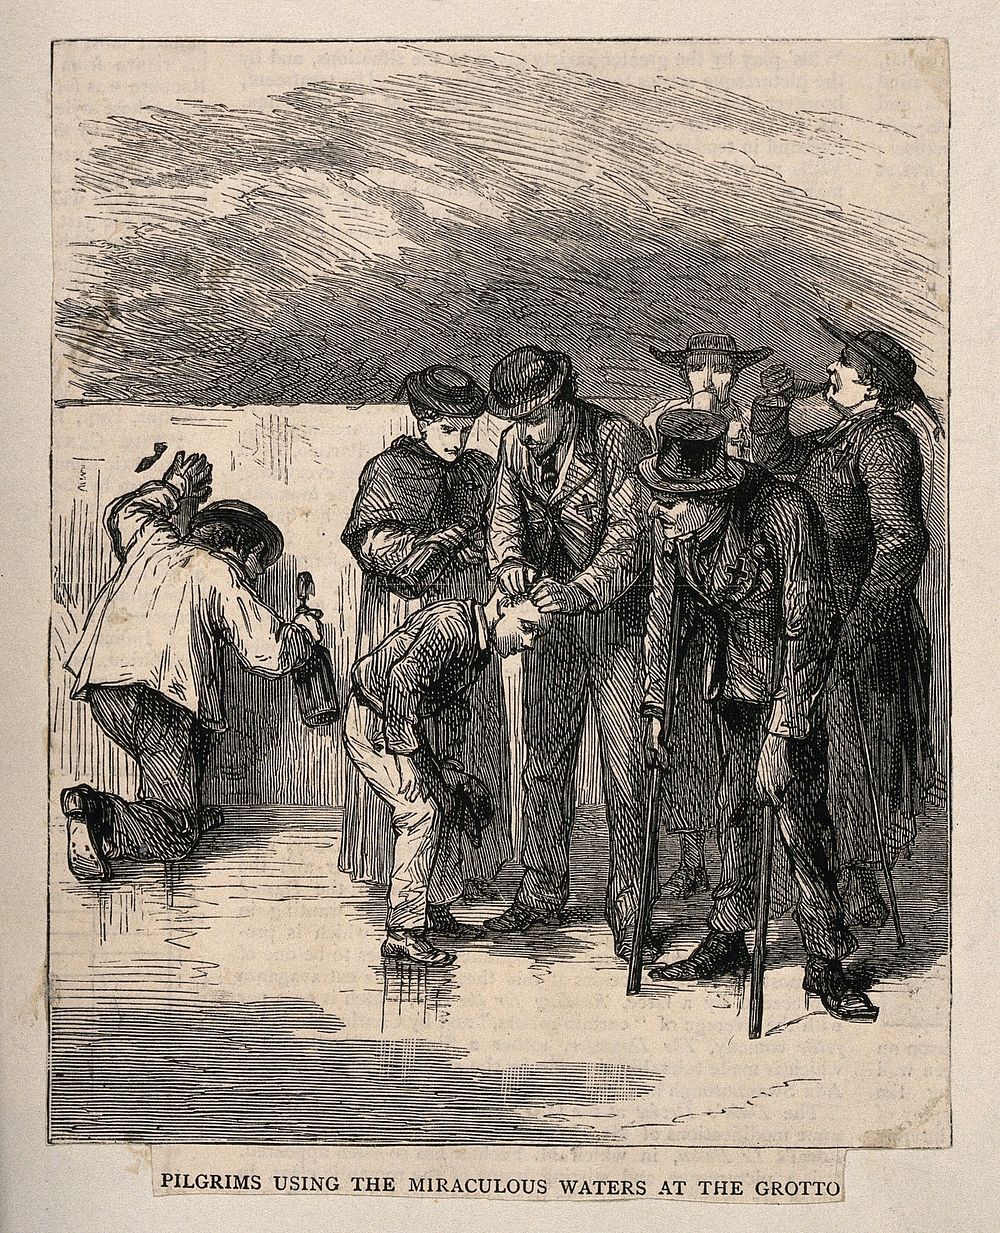 Lourdes, Haute Pyrénées, France: pilgrims seeking cures from the holy water. Wood engraving.